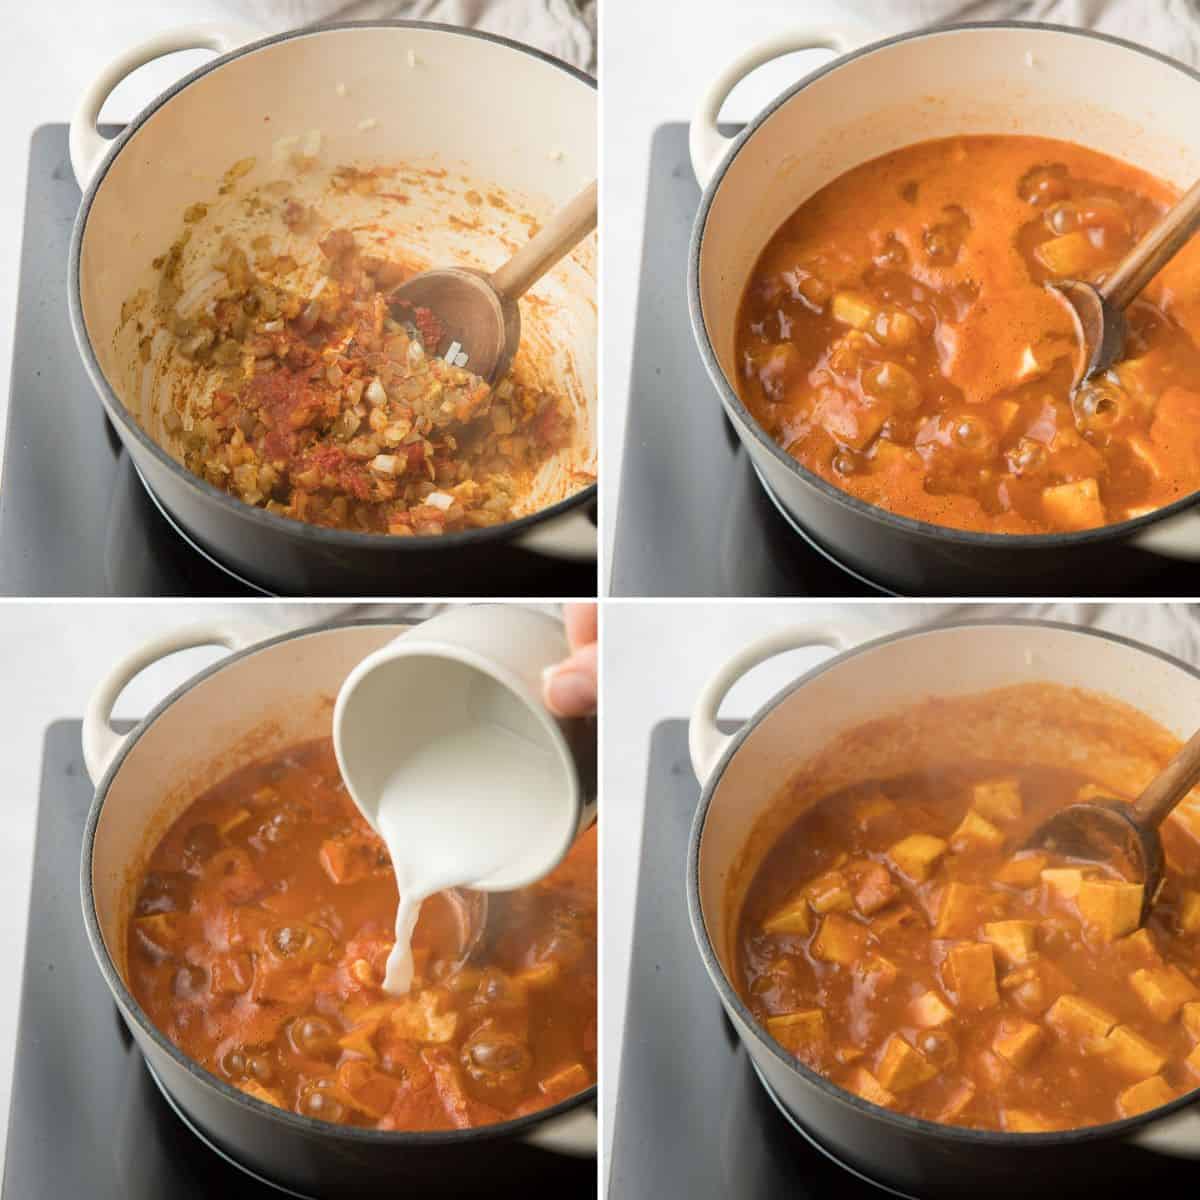 Collage Showing 4 Stages of Tofu Curry Cooking on a Stove.